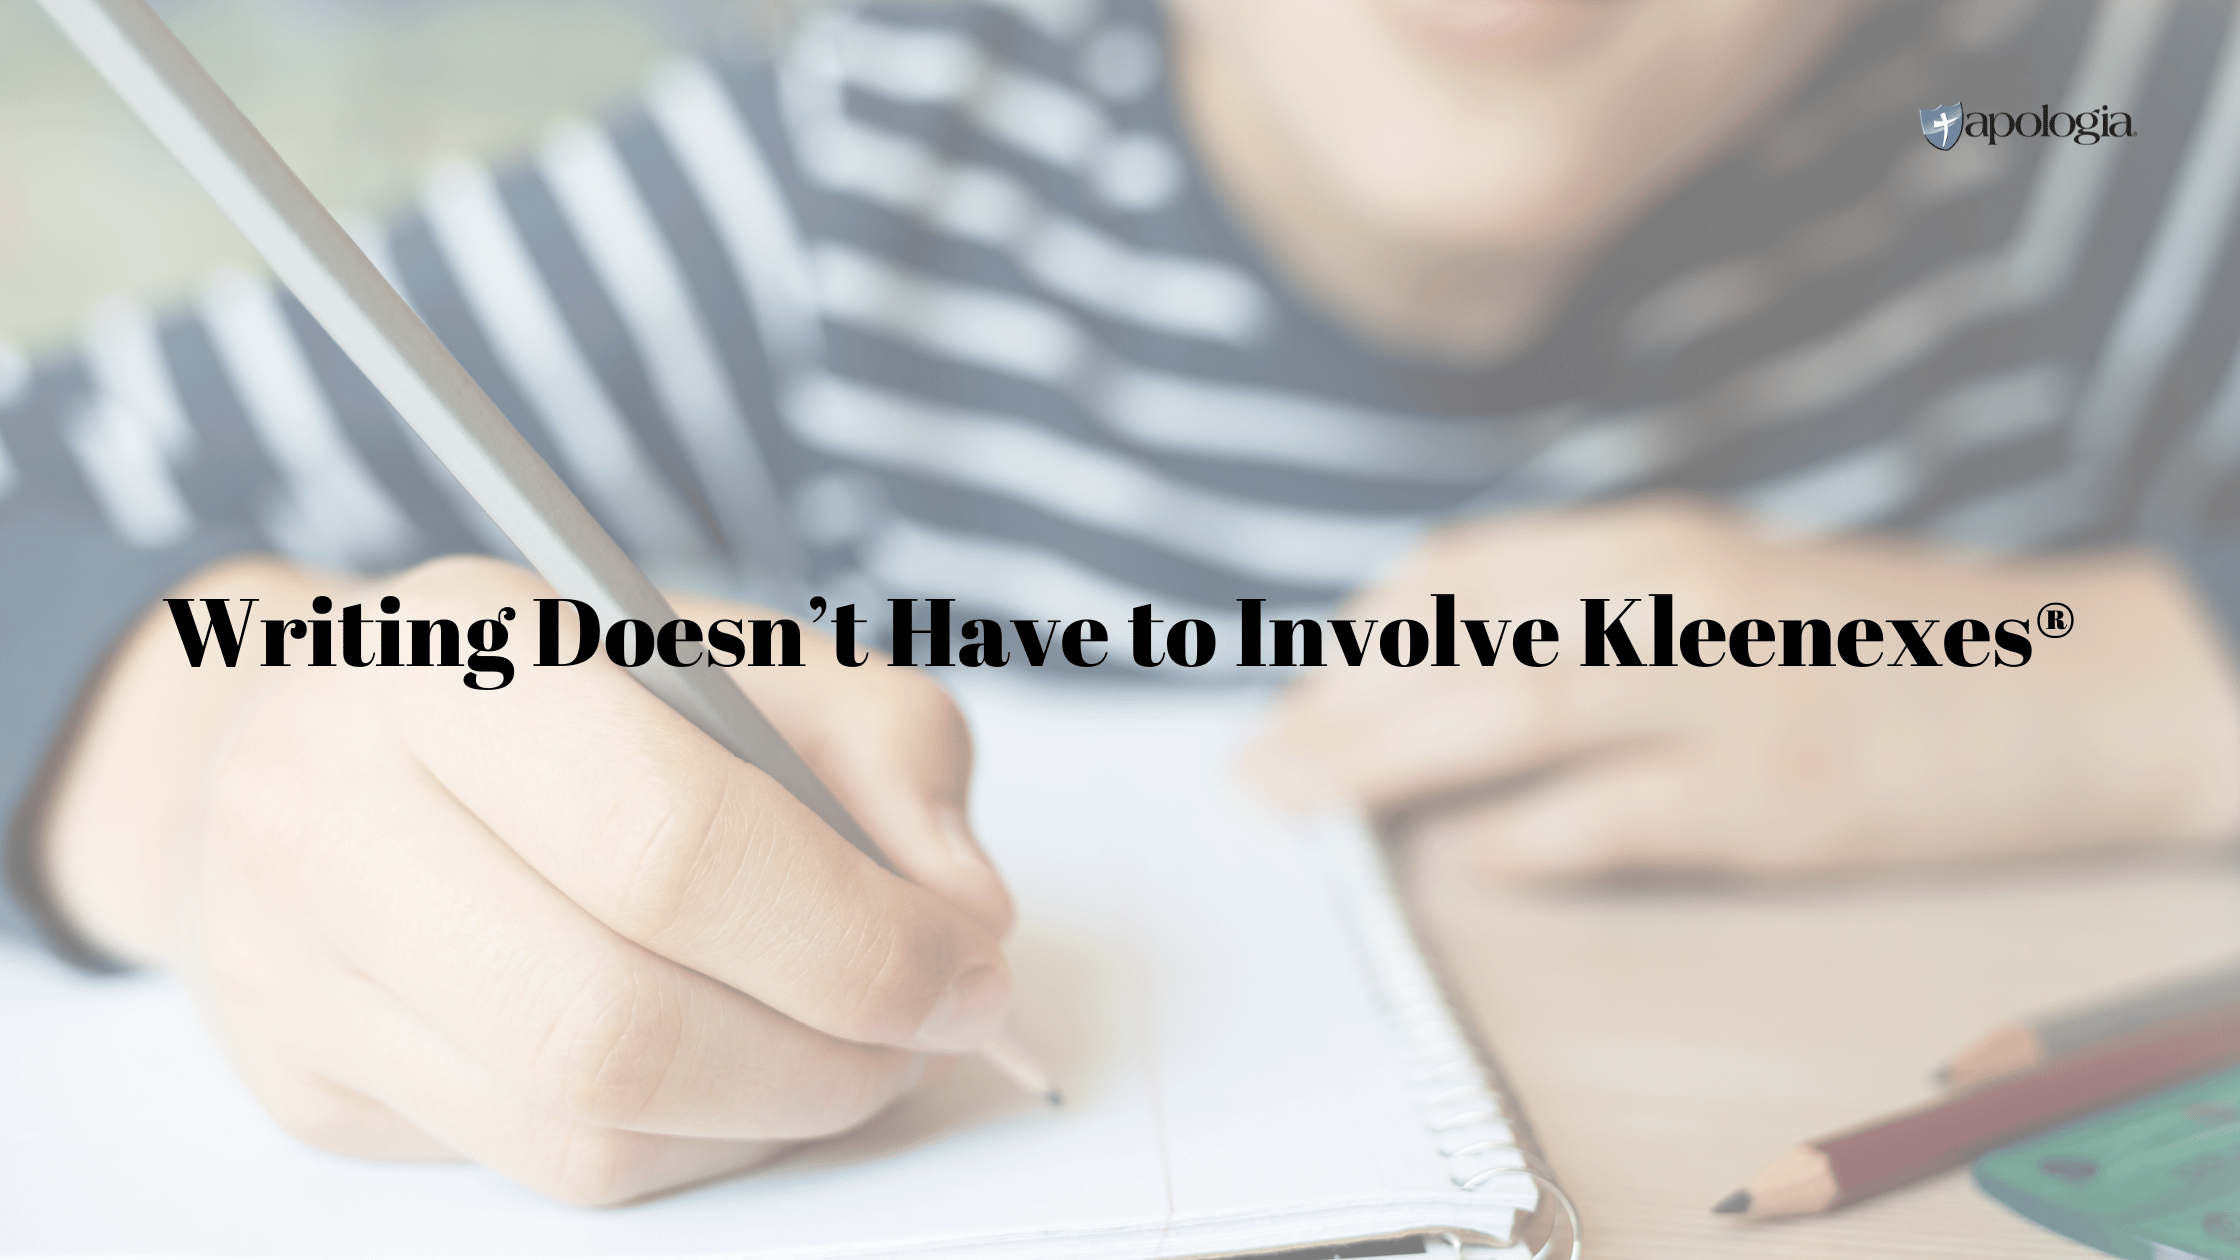 Writing Doesn’t Have to Involve Kleenexes®